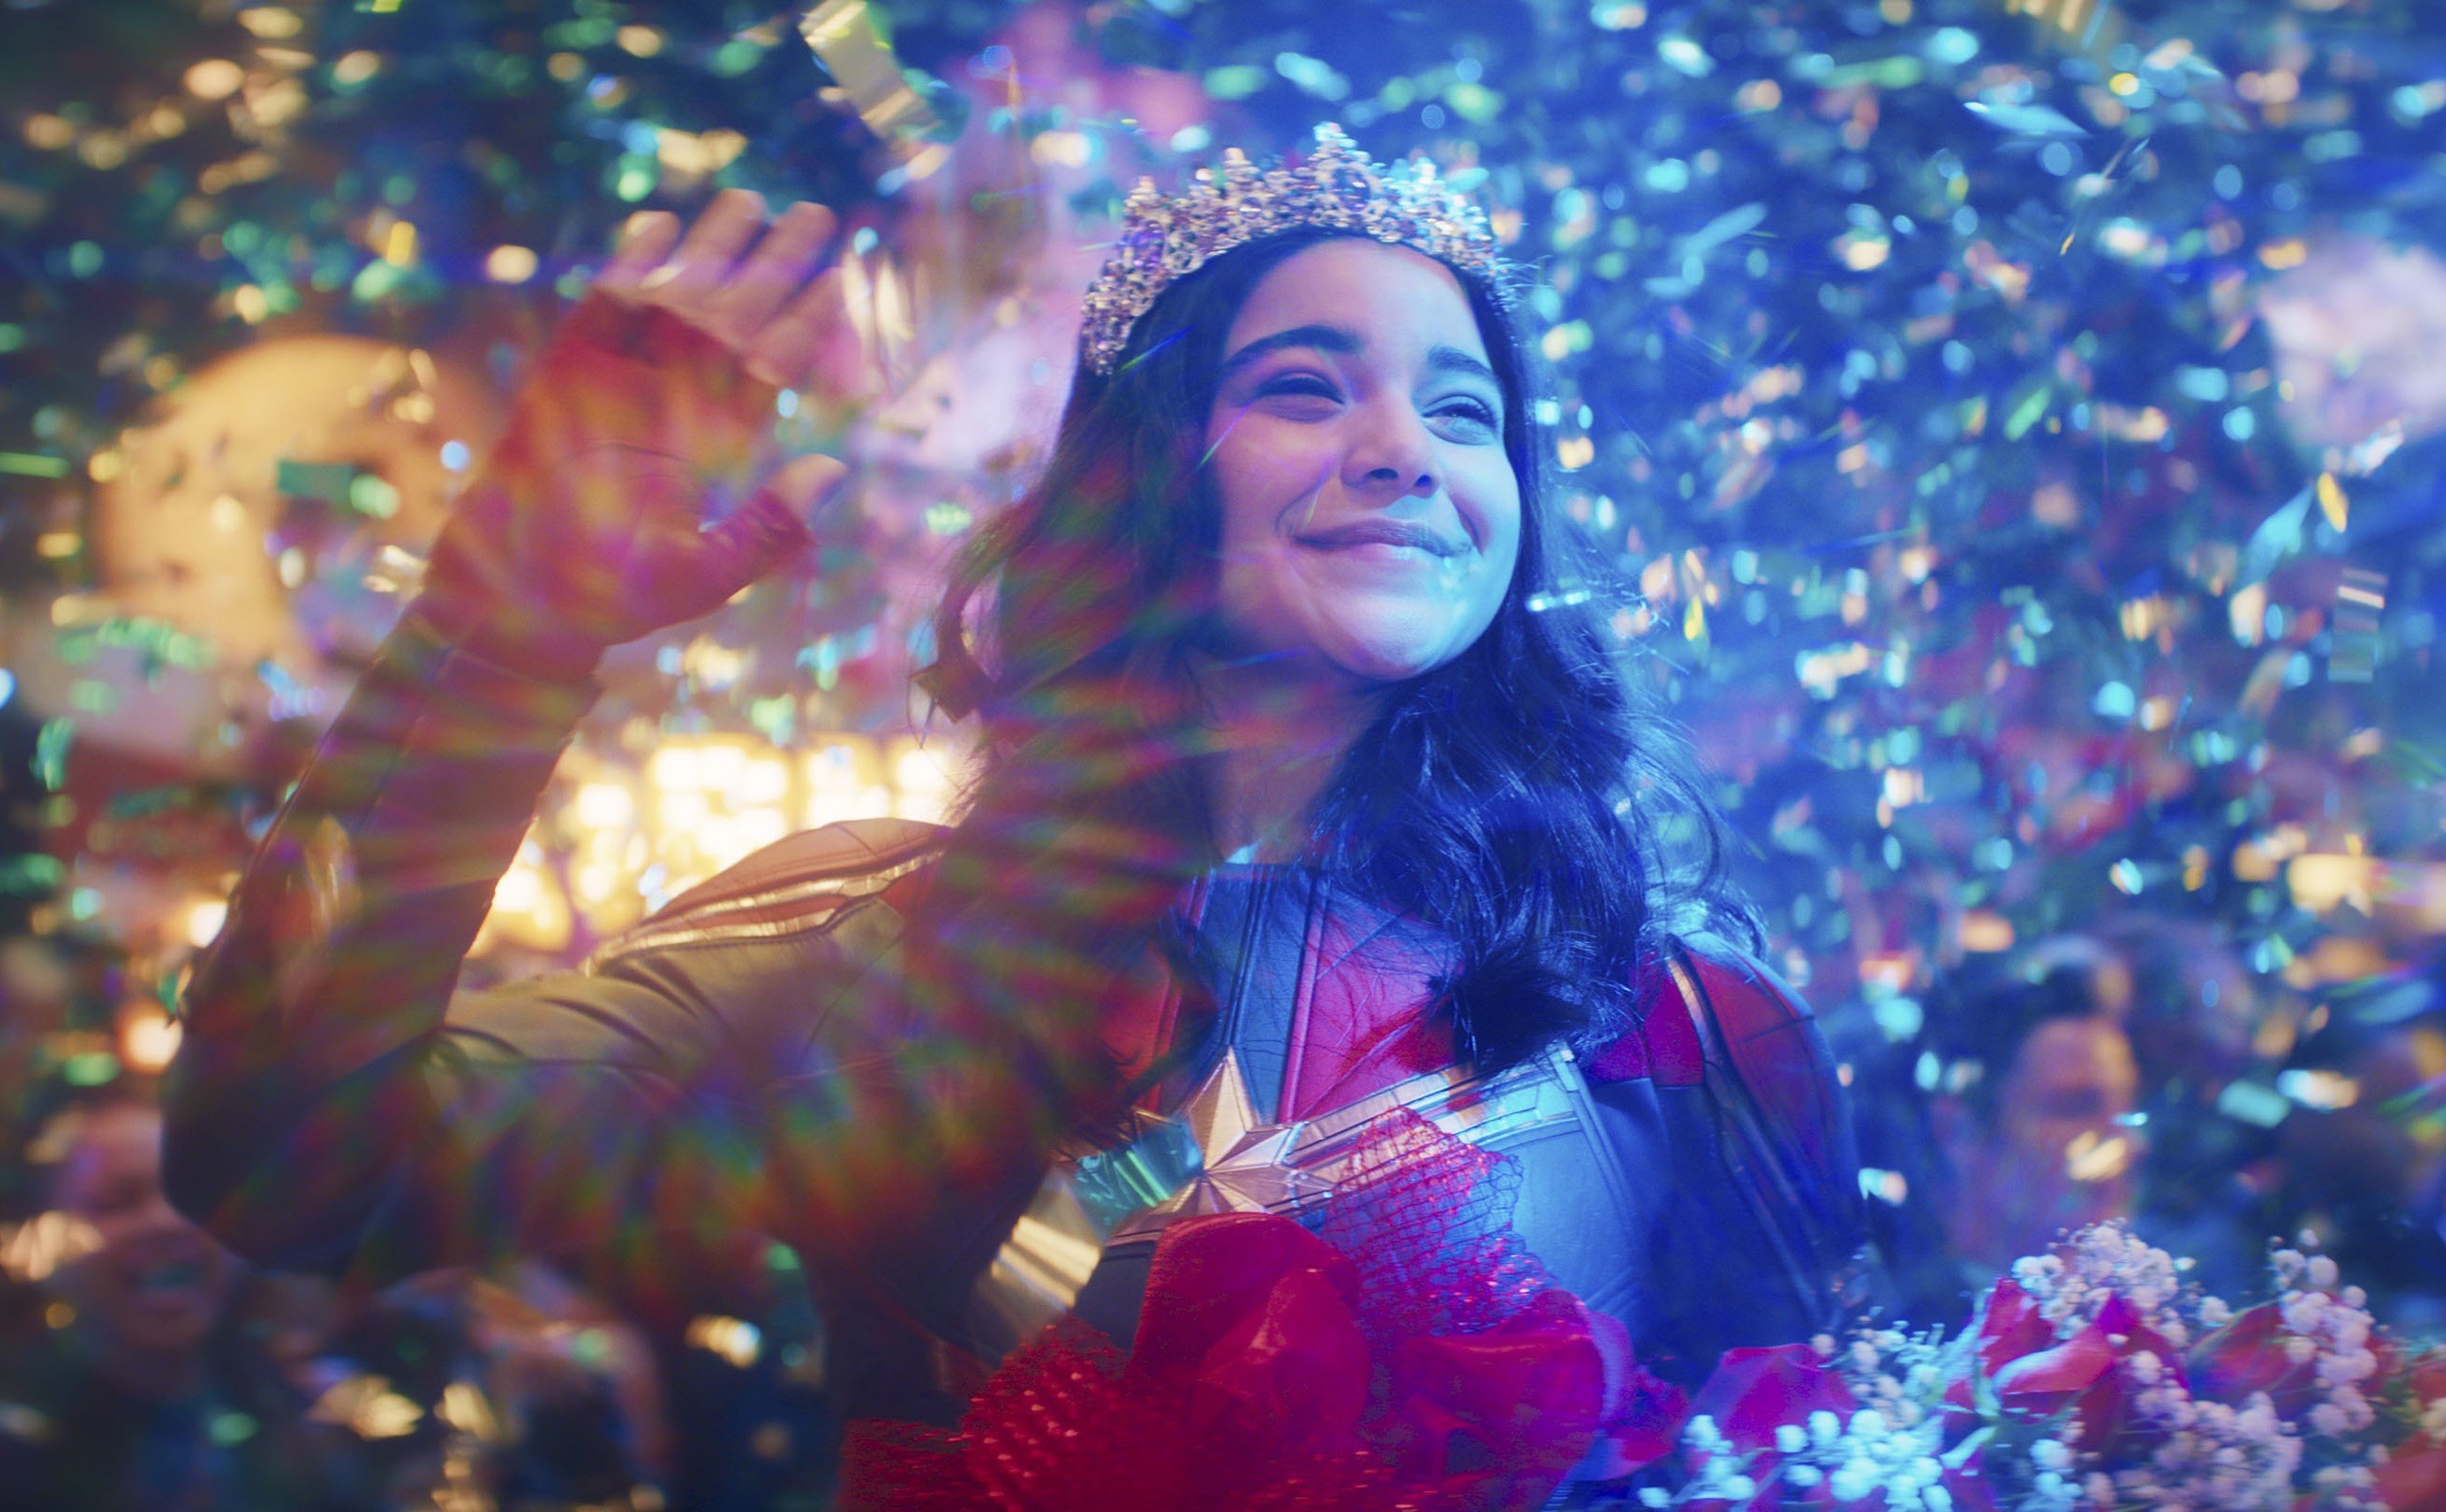 Iman Vellani as Kamala Khan in 'Ms. Marvel' Season 1. She's wearing a tiara, standing on stage, and waving at an audience.